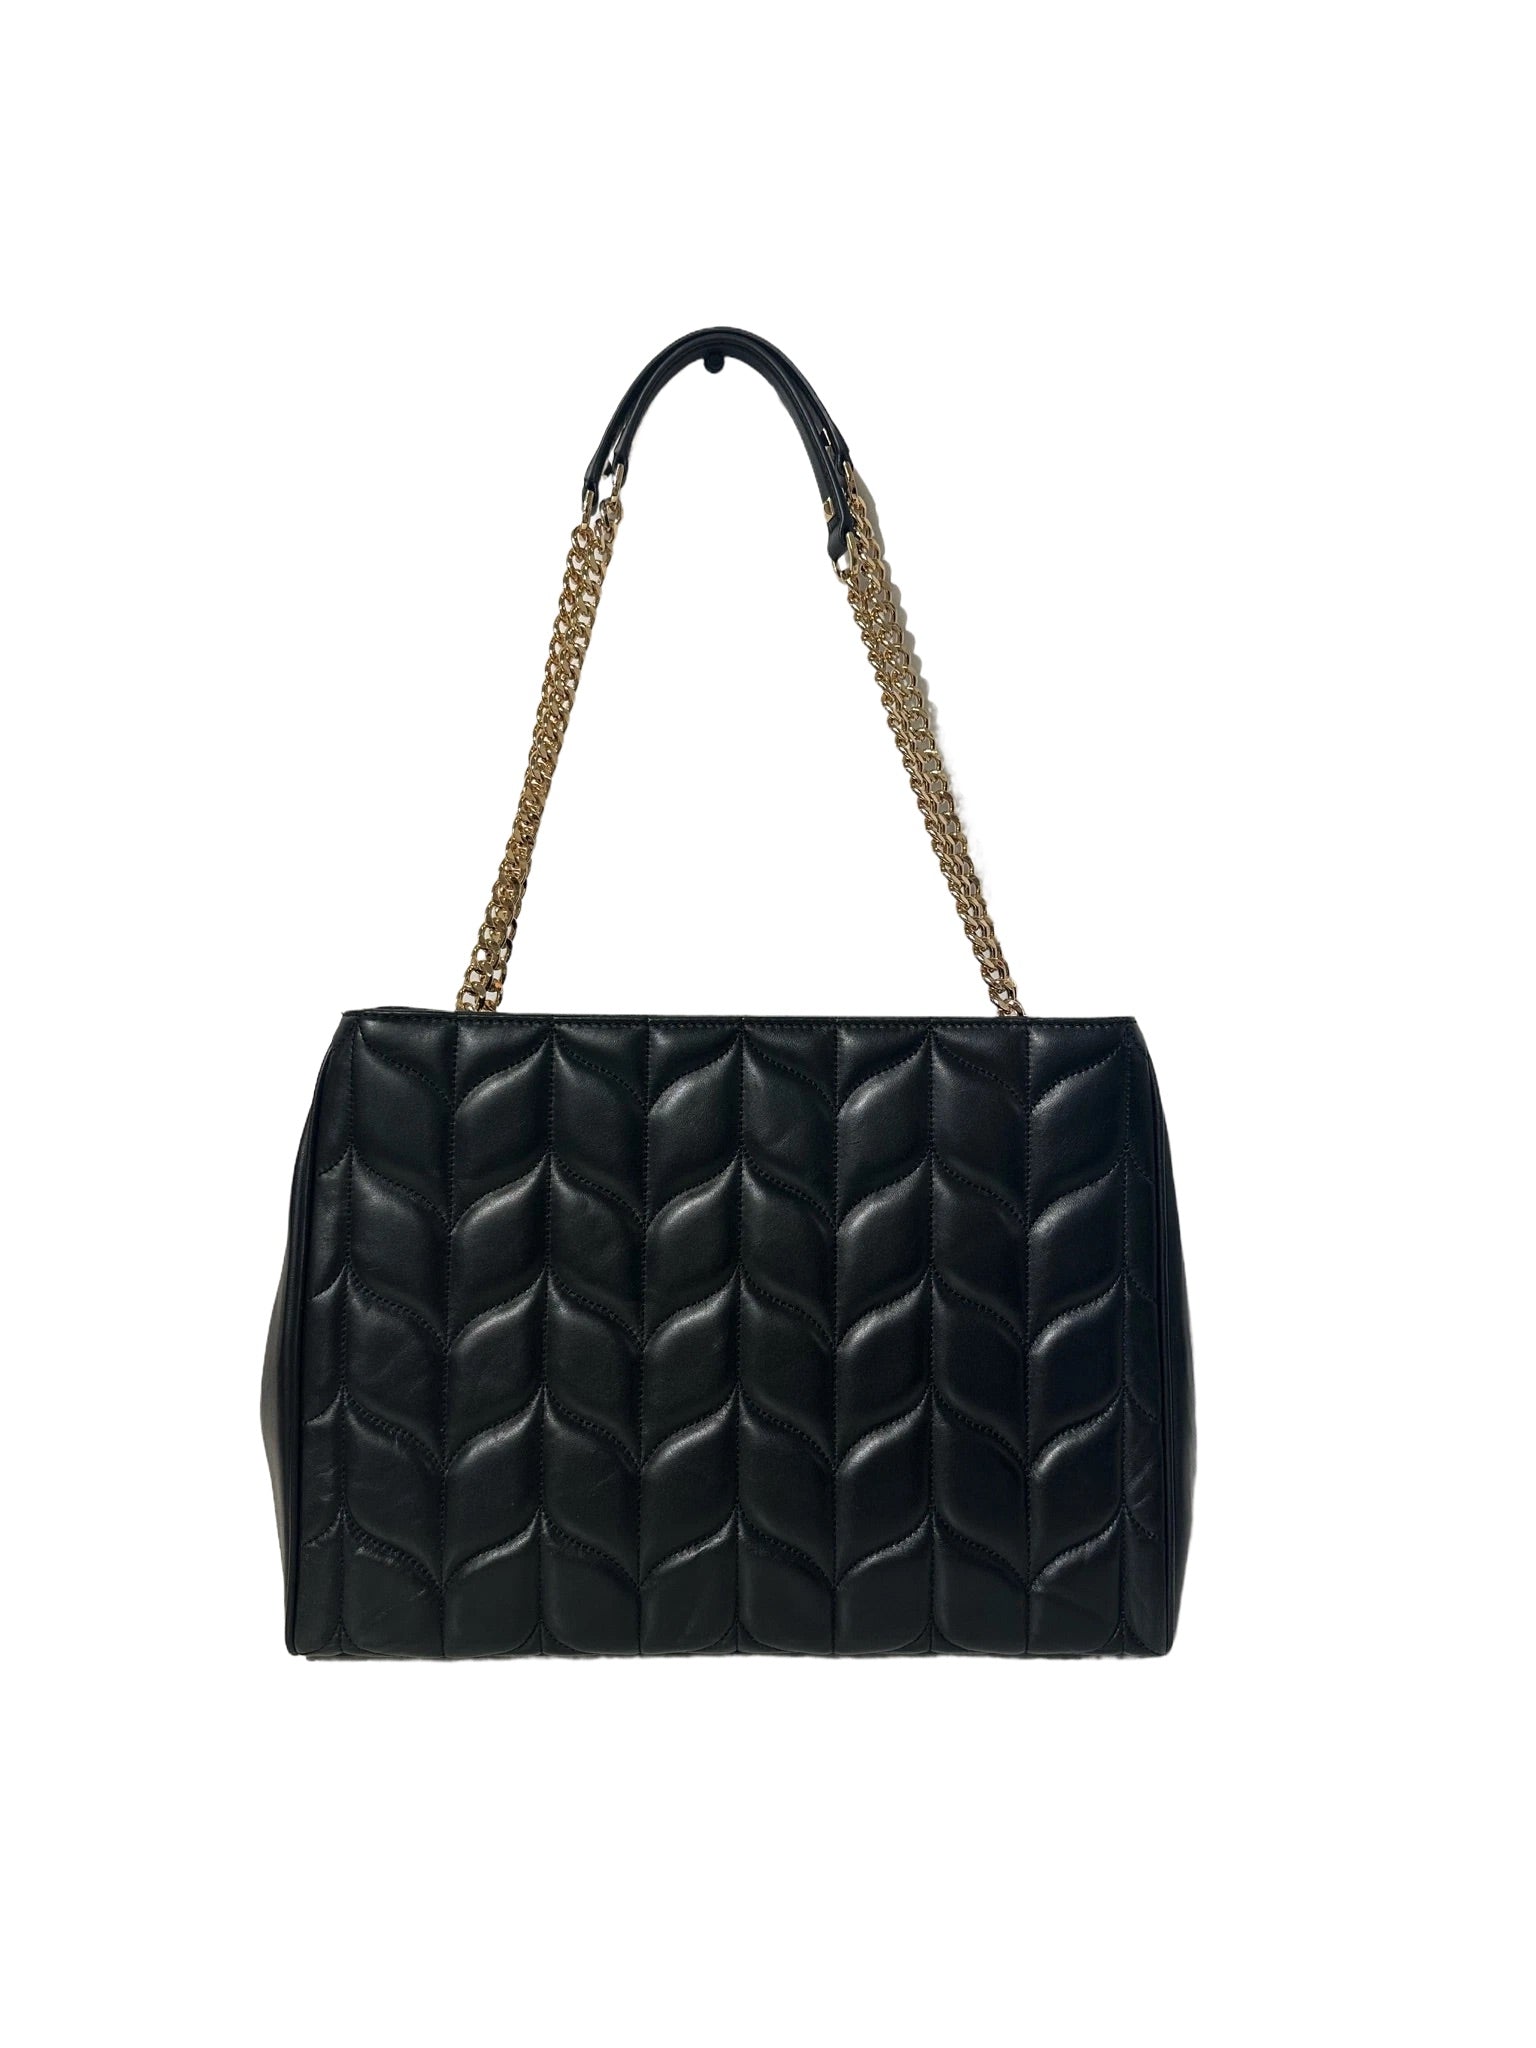 Black Quilted Leather Tote w Gold Chain